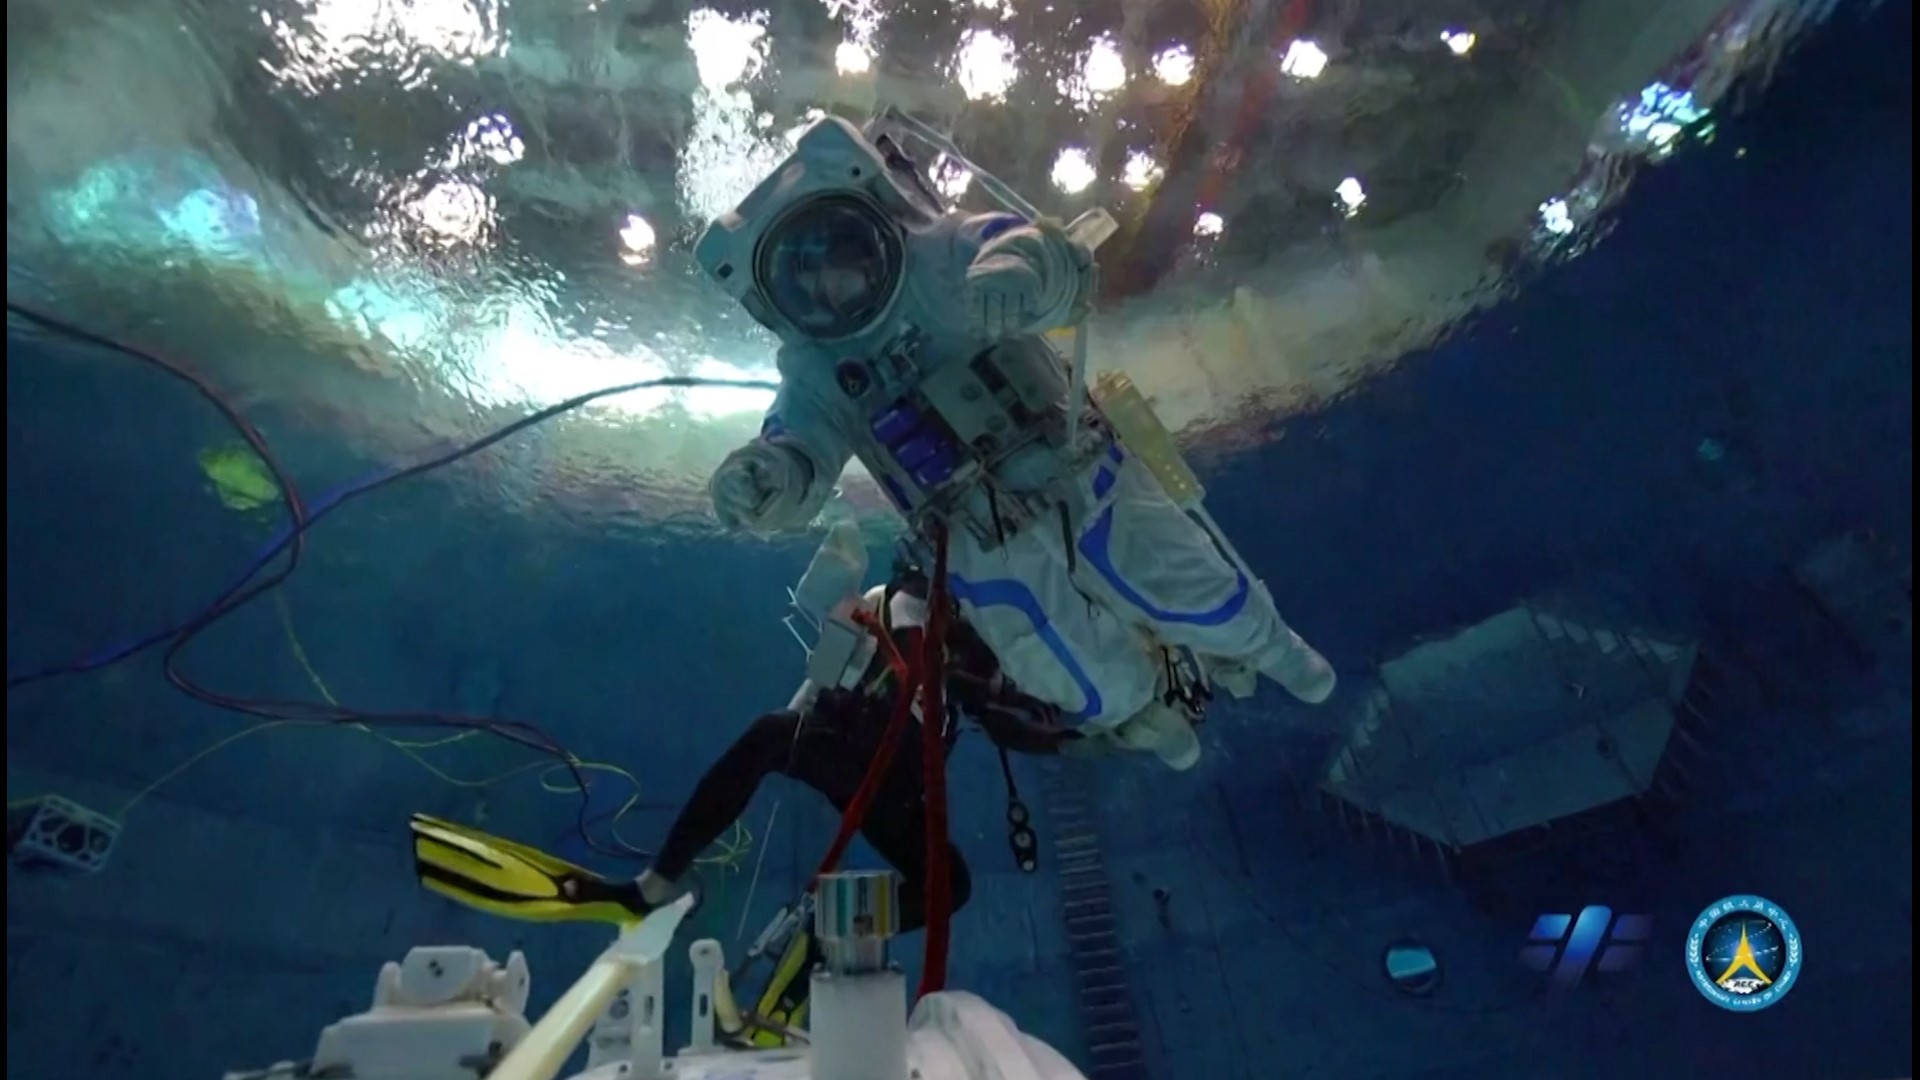 Video released by the China Astronaut Research and Training Center shows Chinese astronauts training Underwater to simulate a weightless environment to prepare them for their upcoming mission aboard China's Tiangong space station. Amazelab's Mercer Morrison has the story.